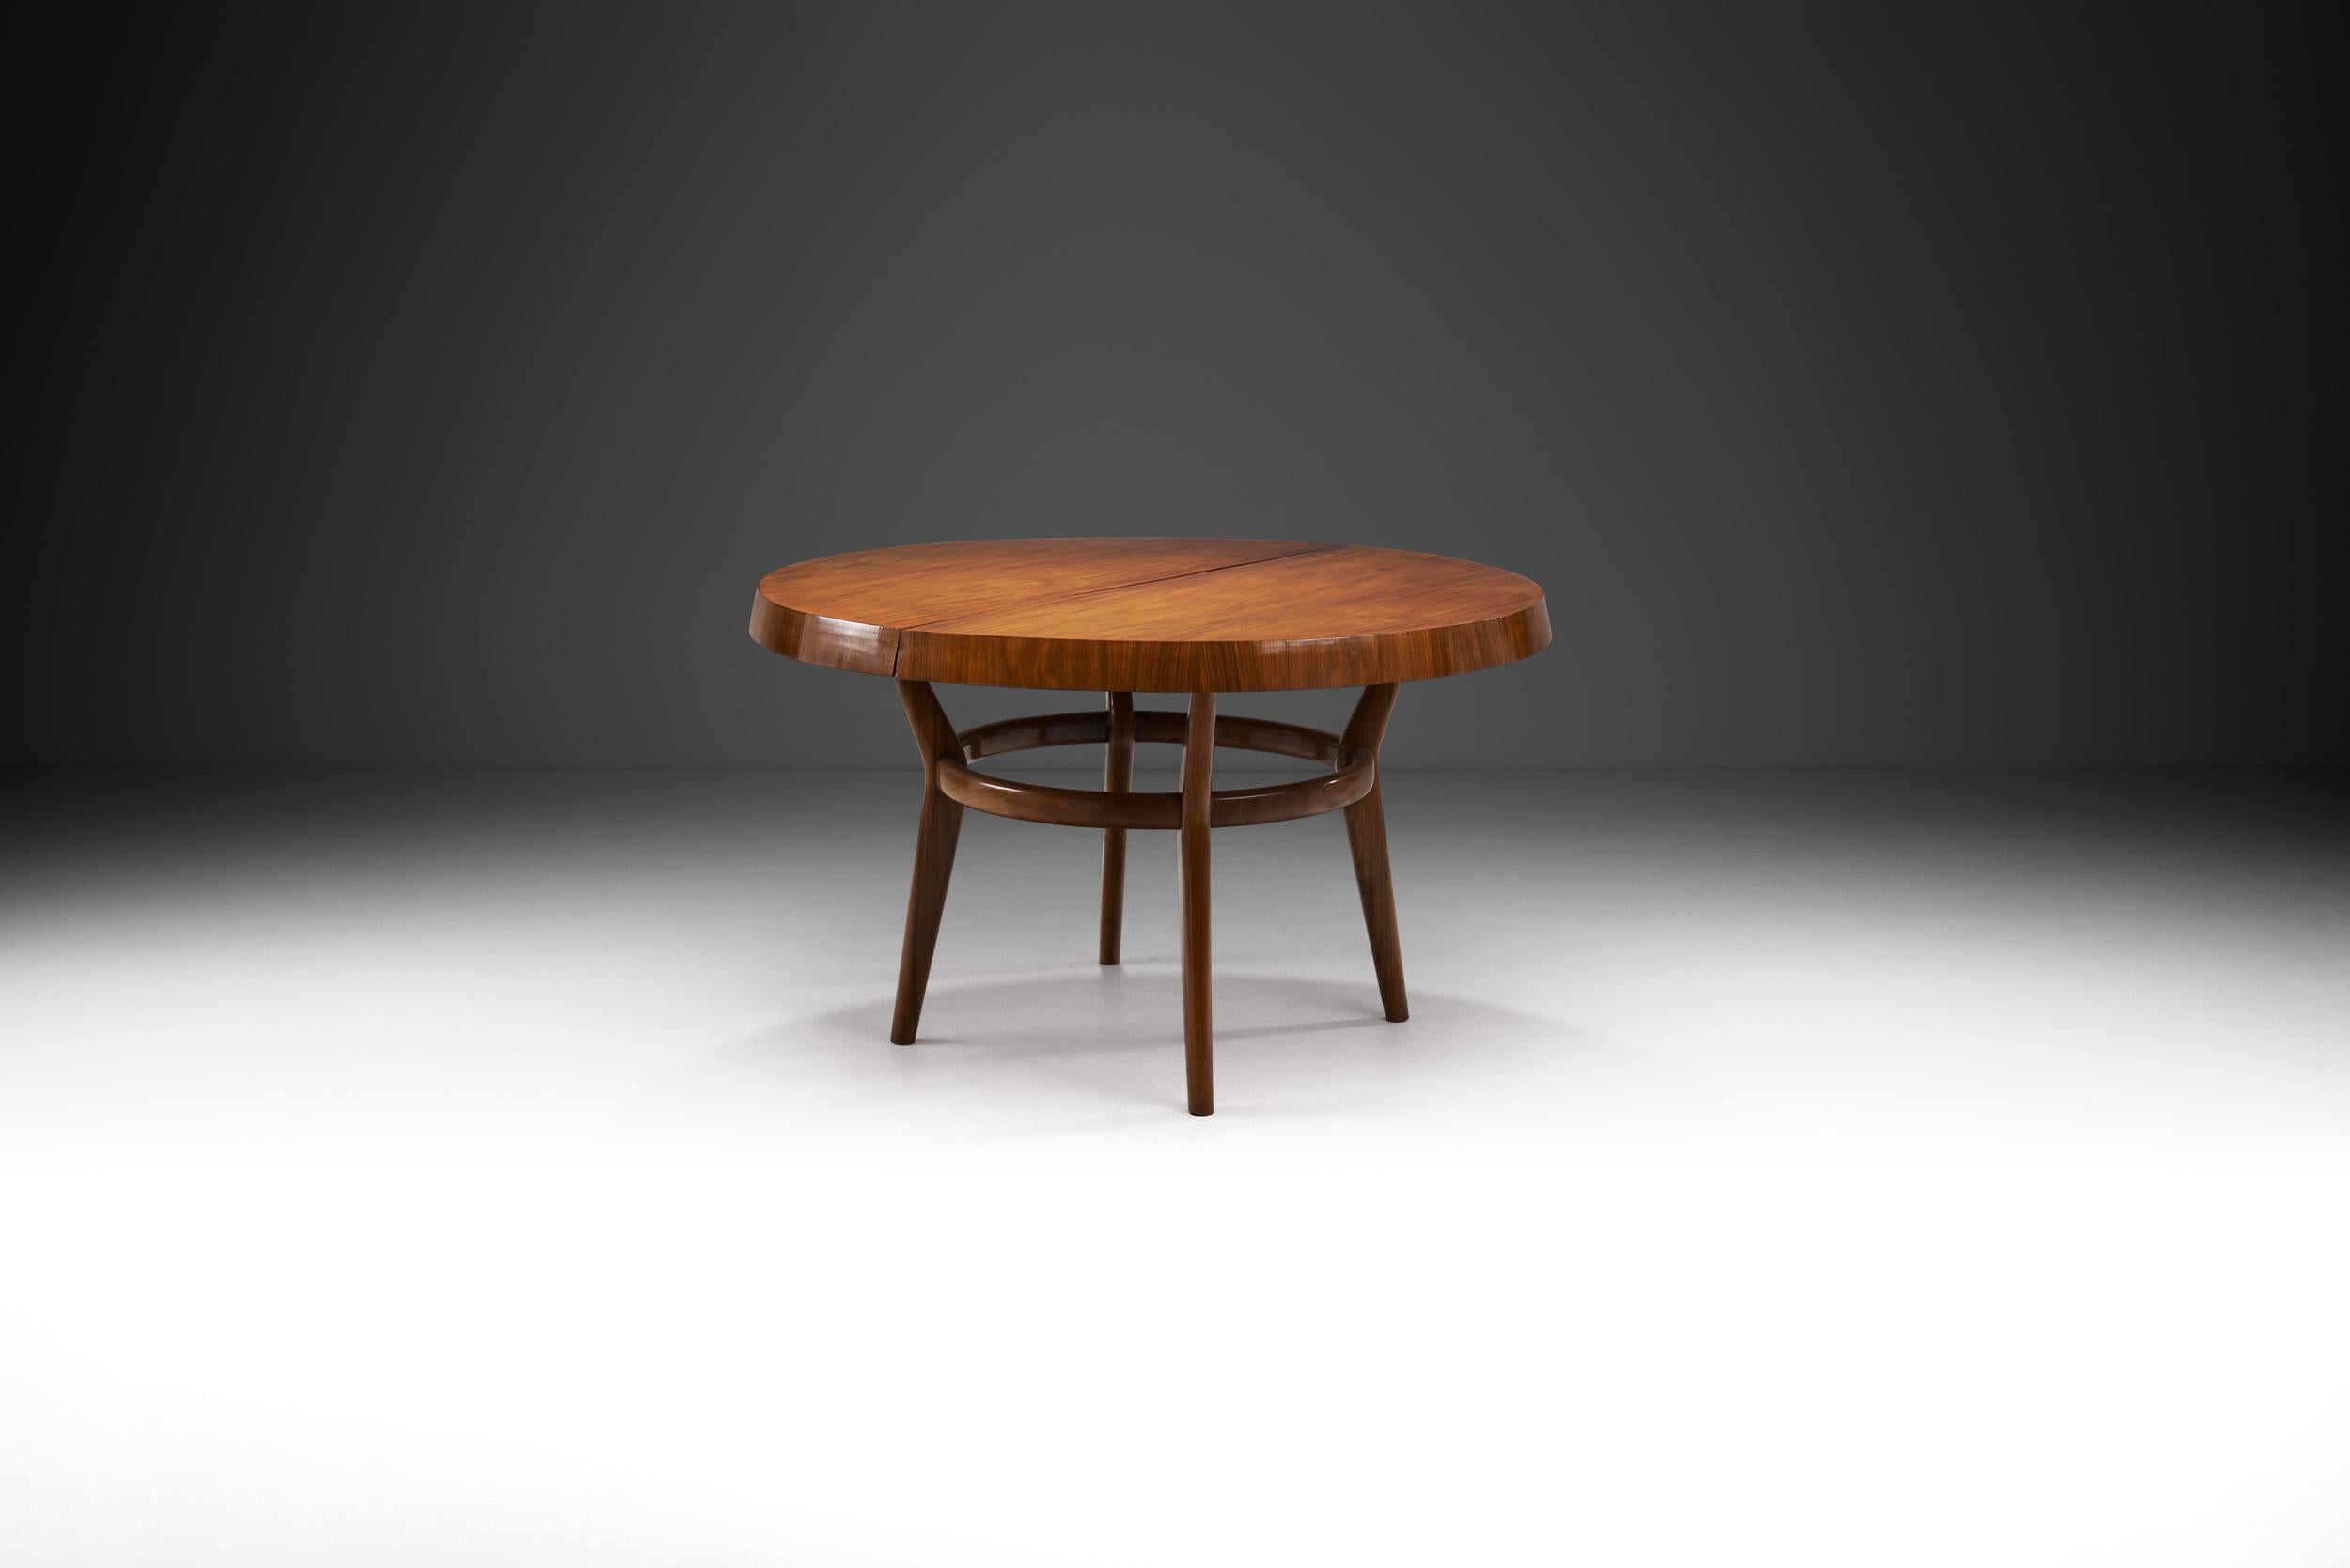 Giuseppe Scapinelli was known as a designer who successfully combined “the classic” with “the modern”, and this table stands as evidence. Scapinelli was a Brazilian designer from São Paulo who did not use any means of mass production. His furniture